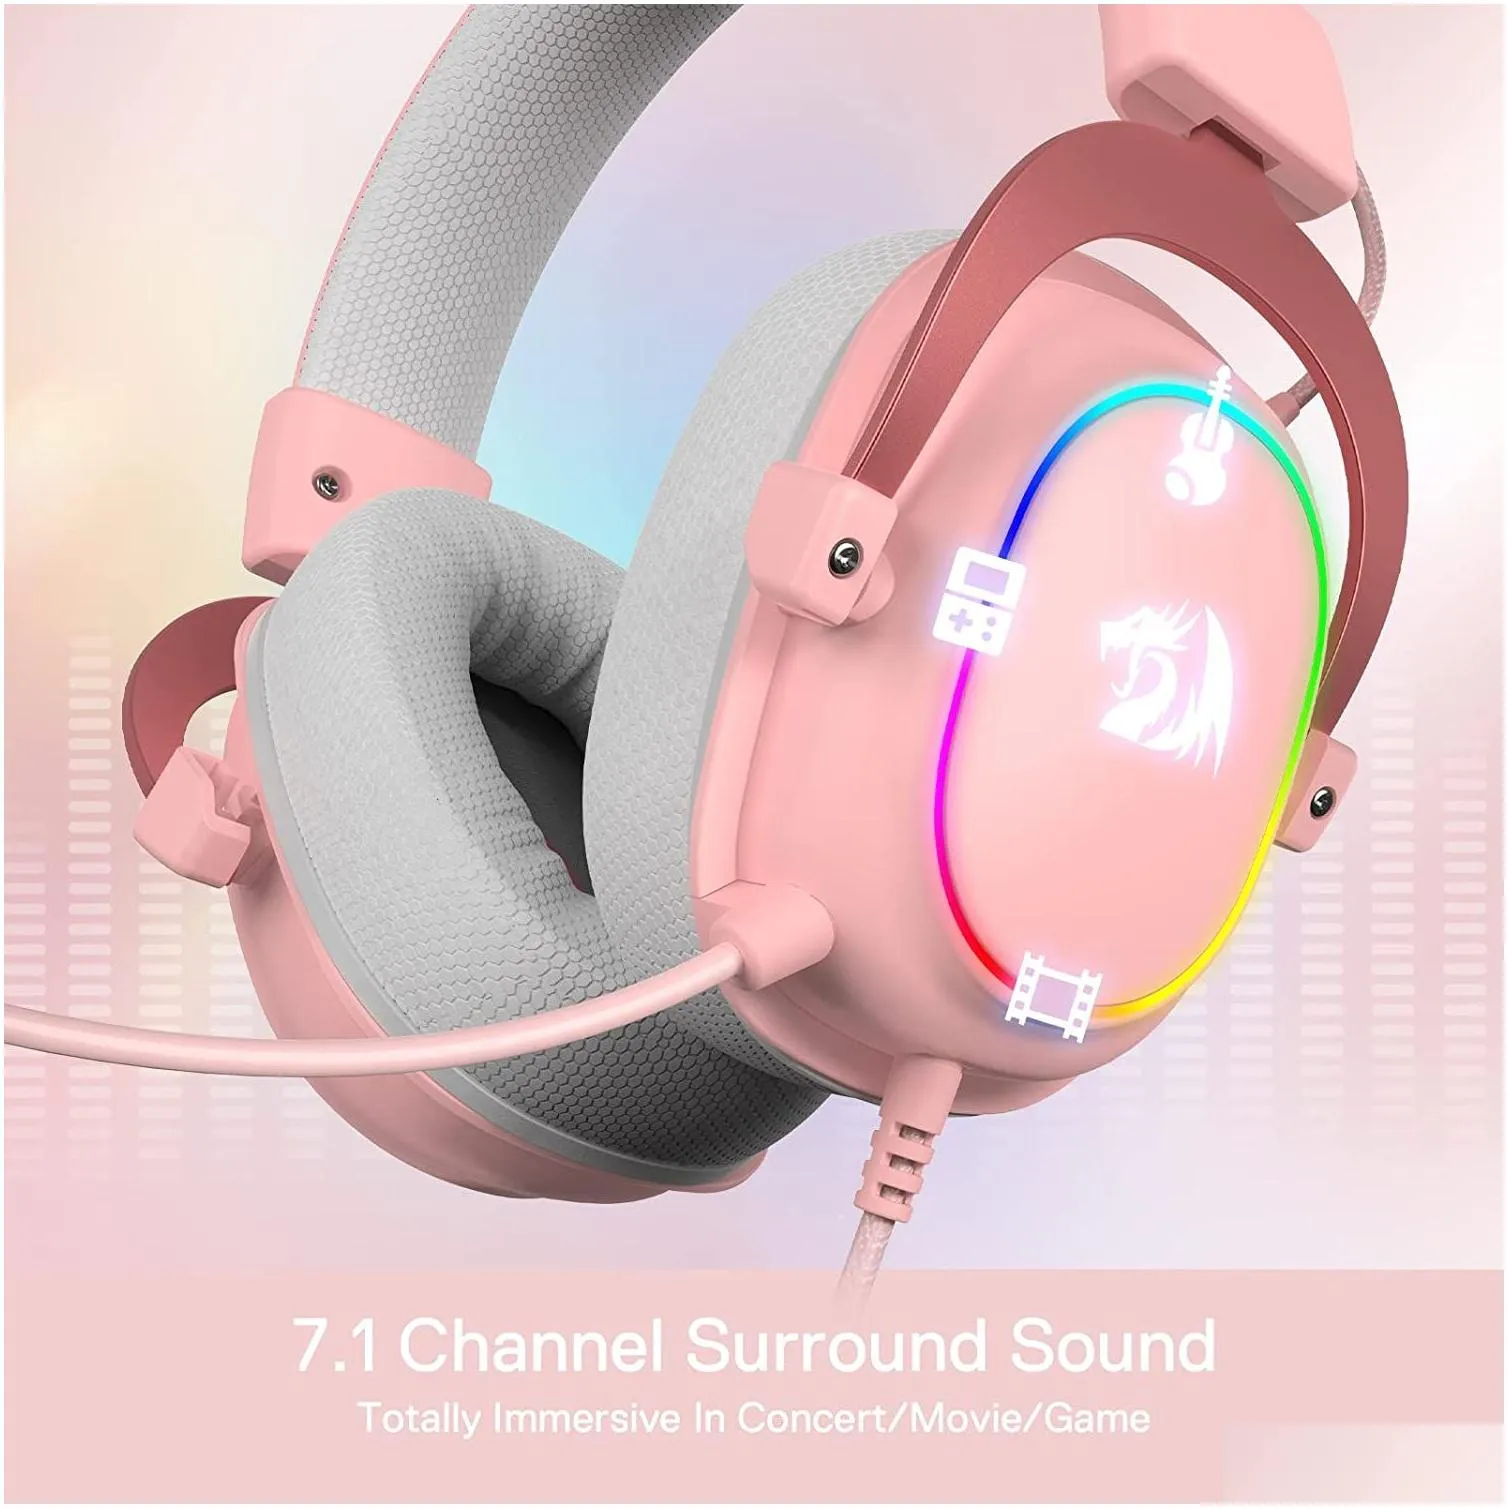 n Pink Earpiece RGB Wired Gaming Headset - 7.1 Surround Sound Multi Platforms Headphone USB Powered for PC/PS4/NS